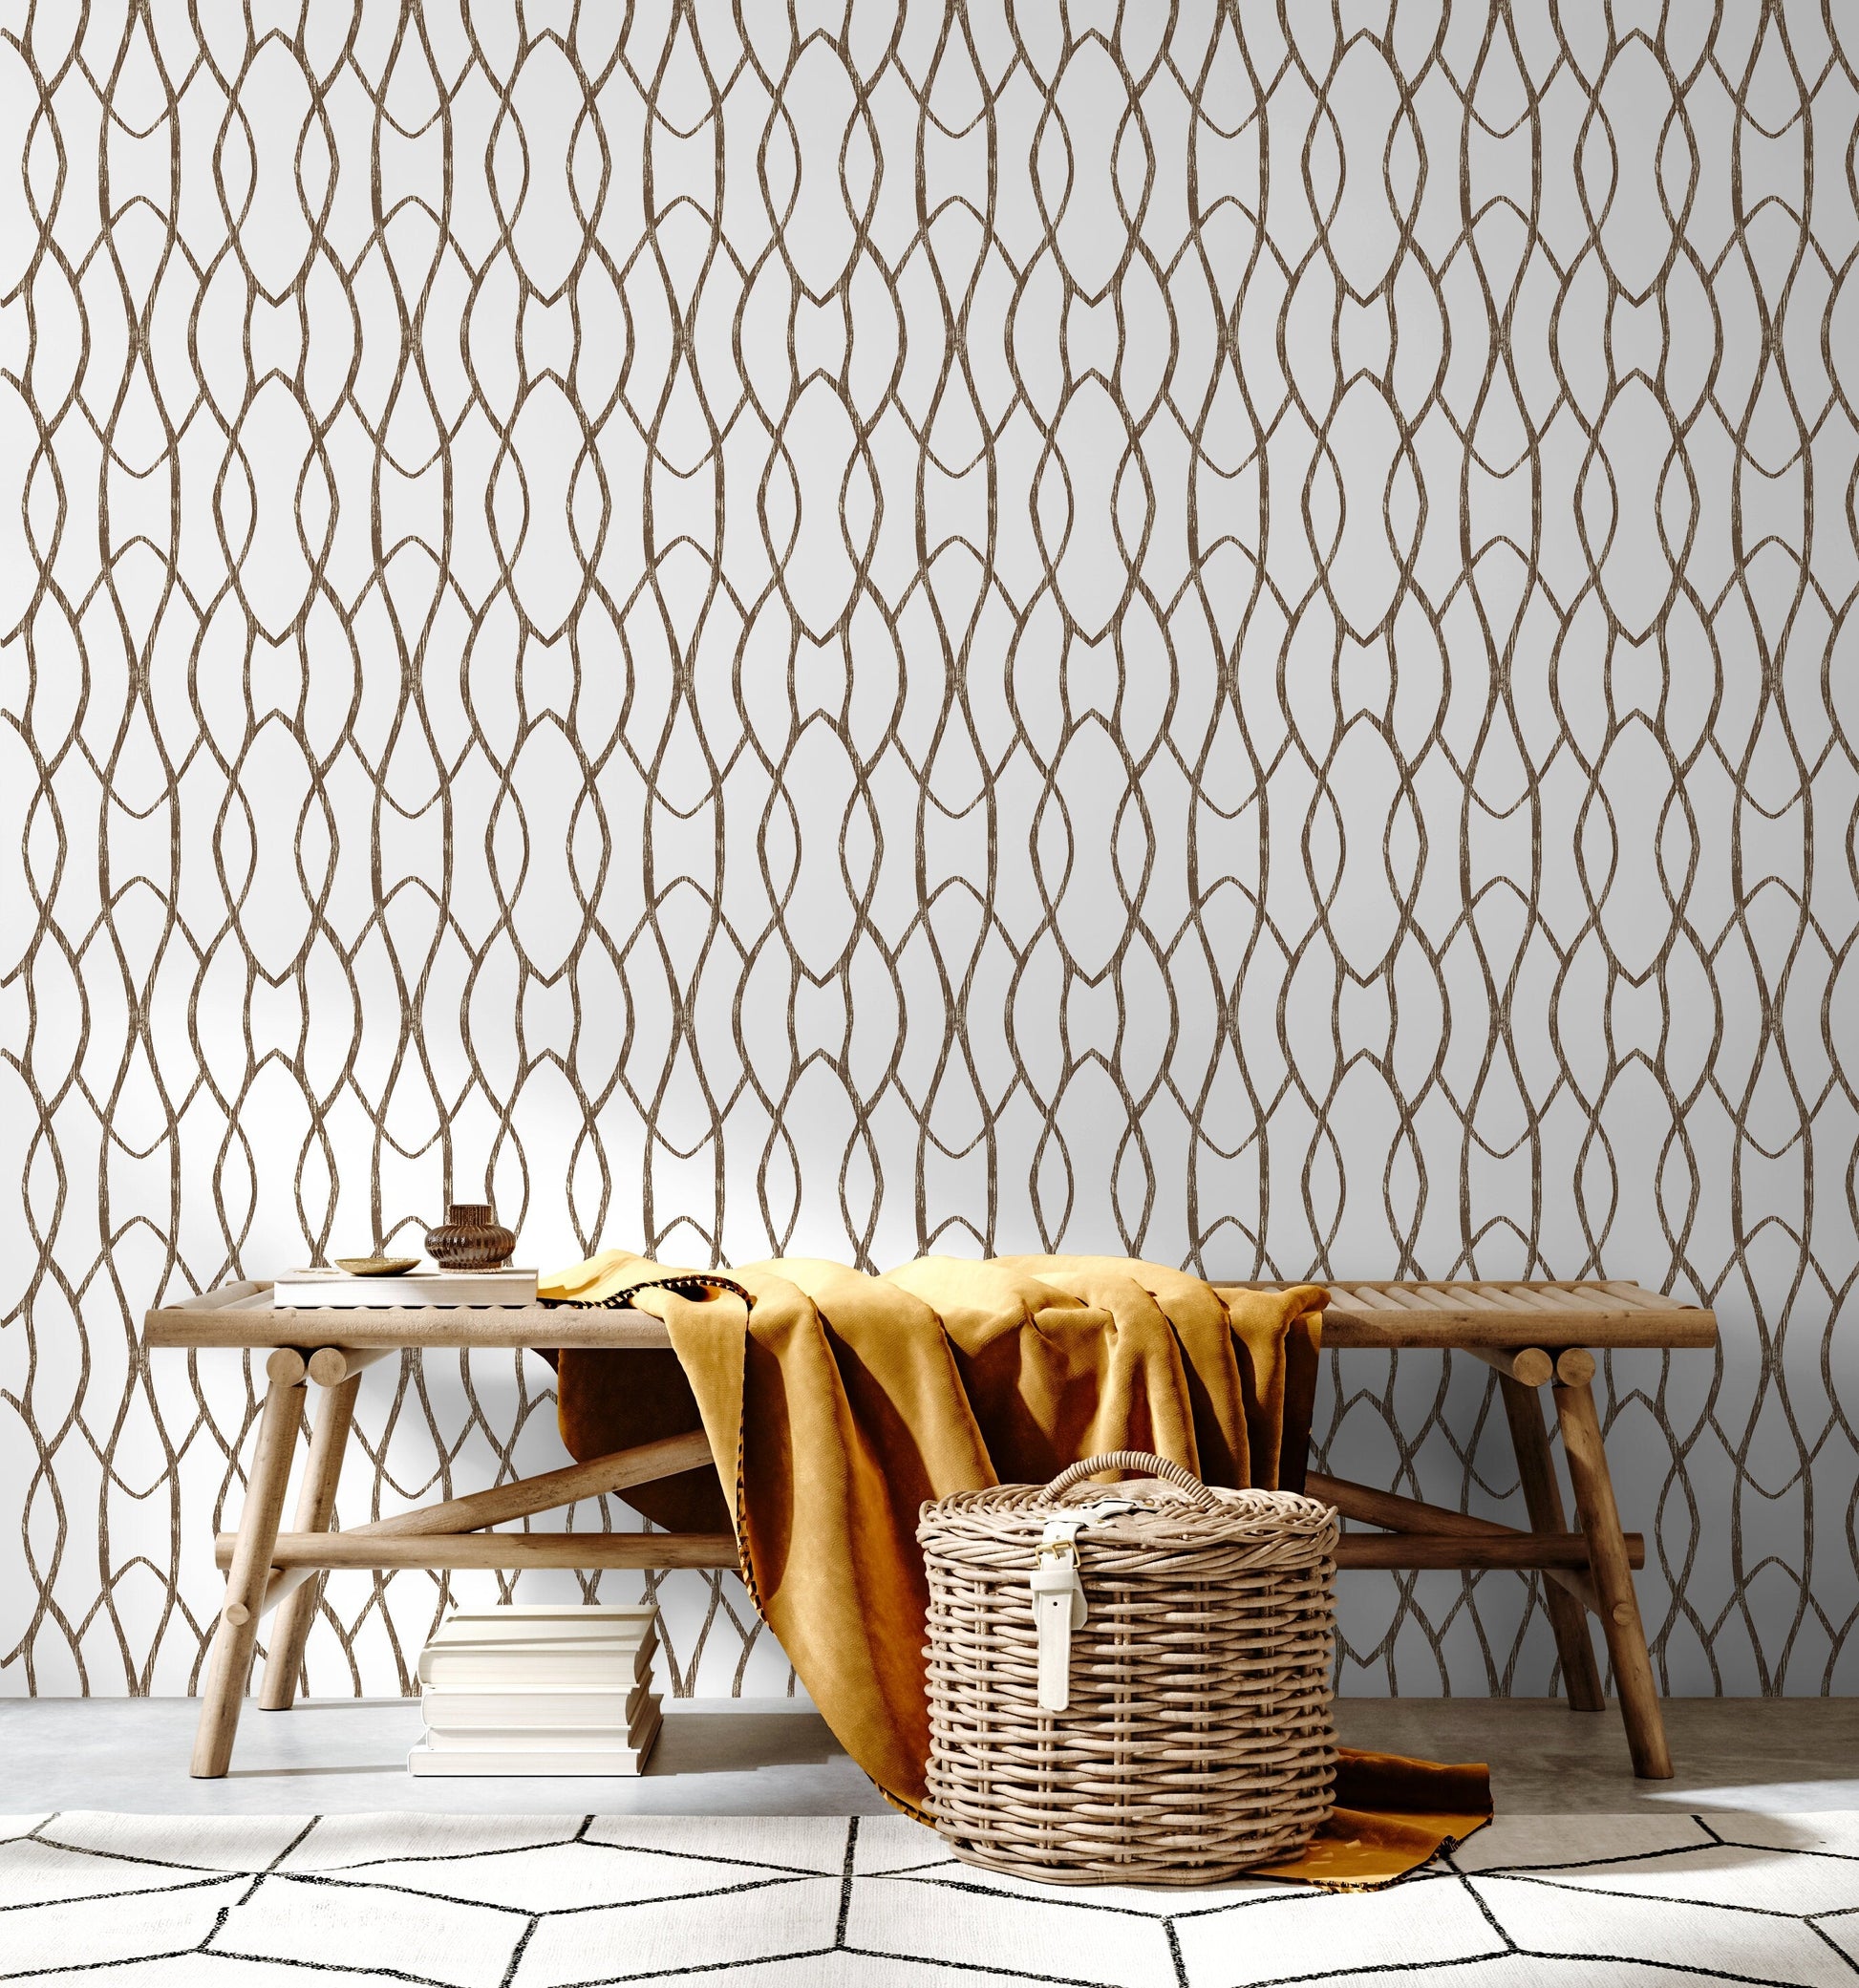 Brown and White Modern Wallpaper / Peel and Stick Wallpaper Removable Wallpaper Home Decor Wall Art Wall Decor Room Decor - C889